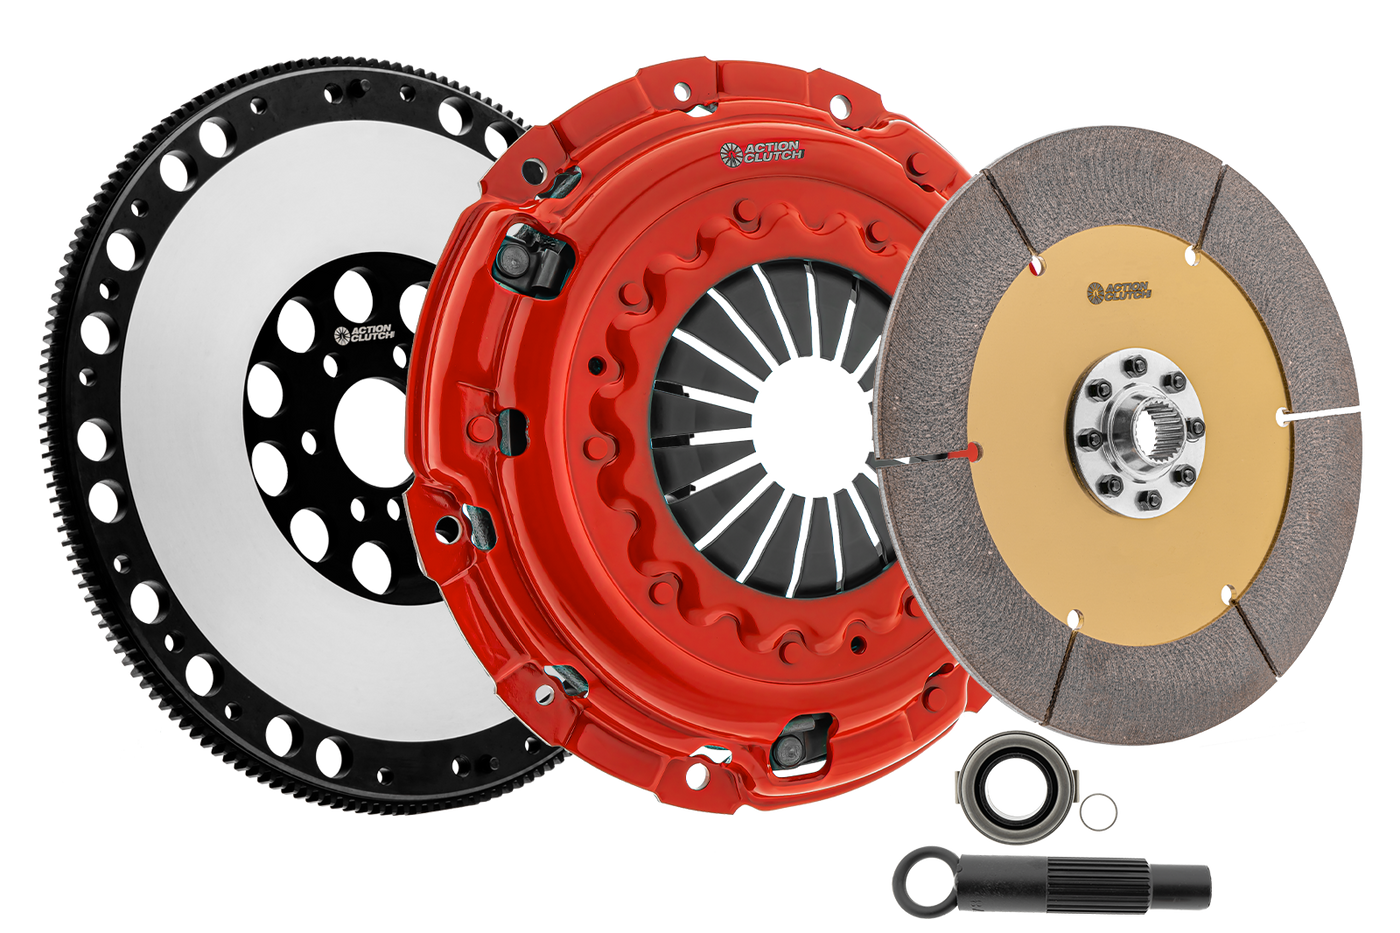 Ironman Unsprung Clutch Kit for BMW 325 1987-1988 2.7L (M20B27) Includes Lightened Flywheel